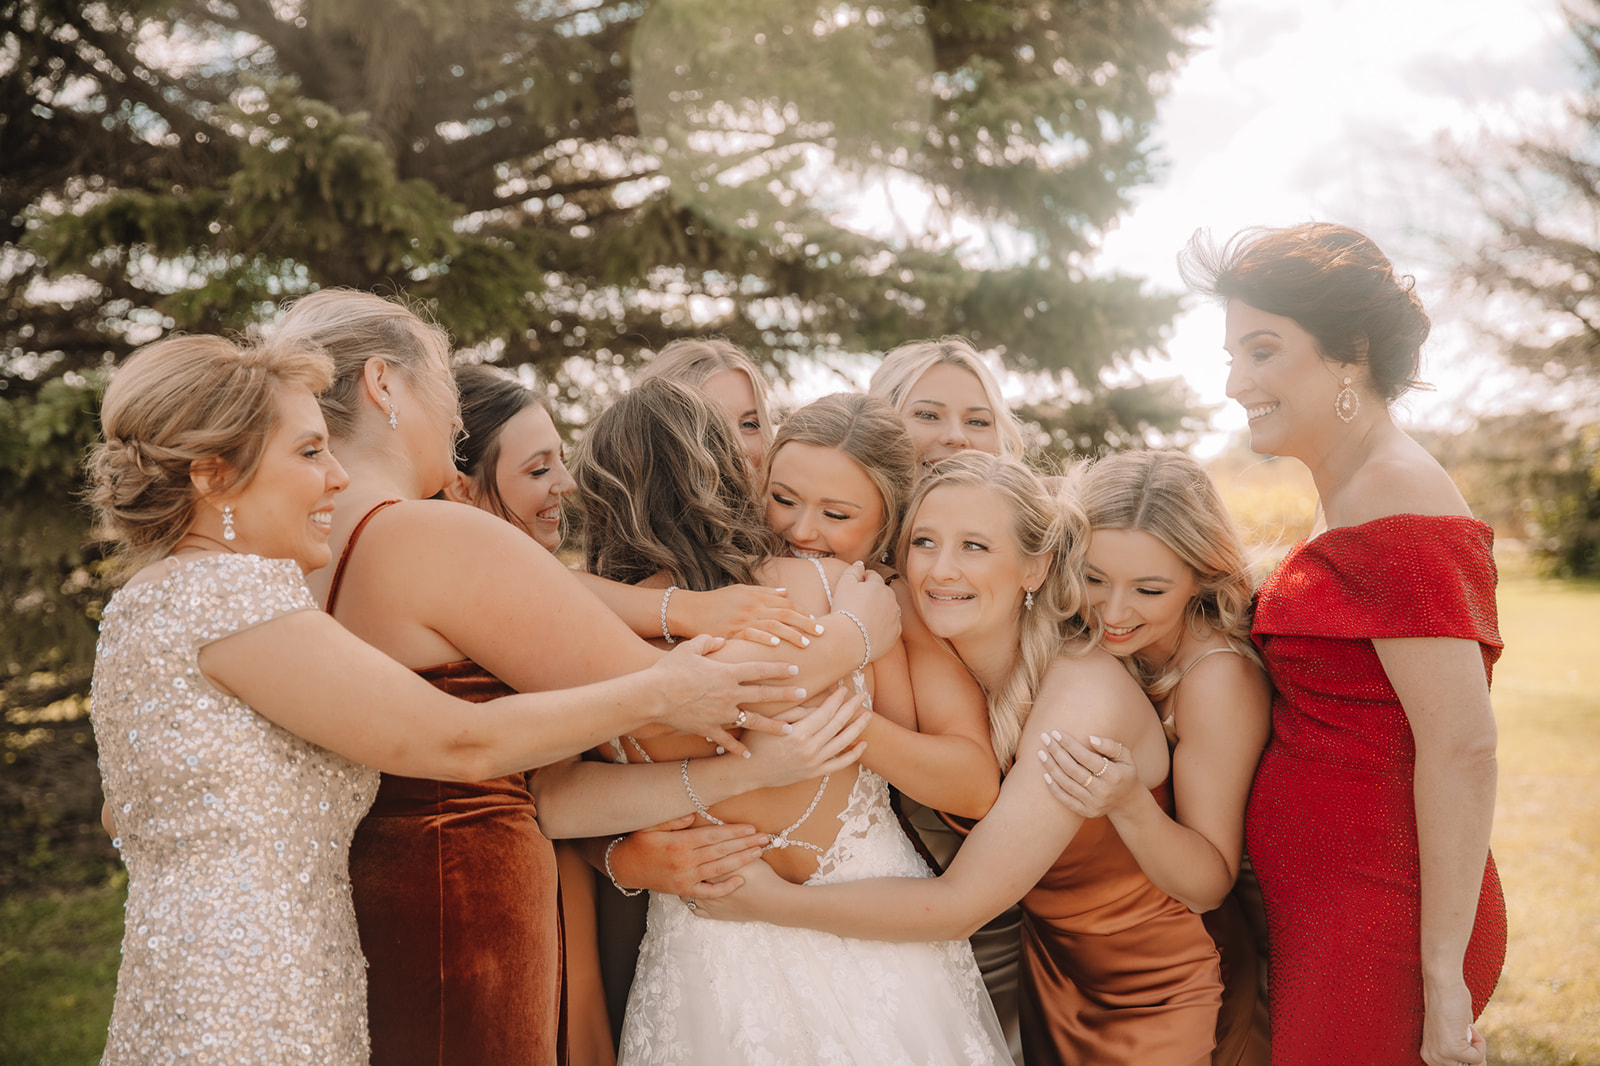 Bride surrounded by emotional hugs from bridesmaids after dress reveal.